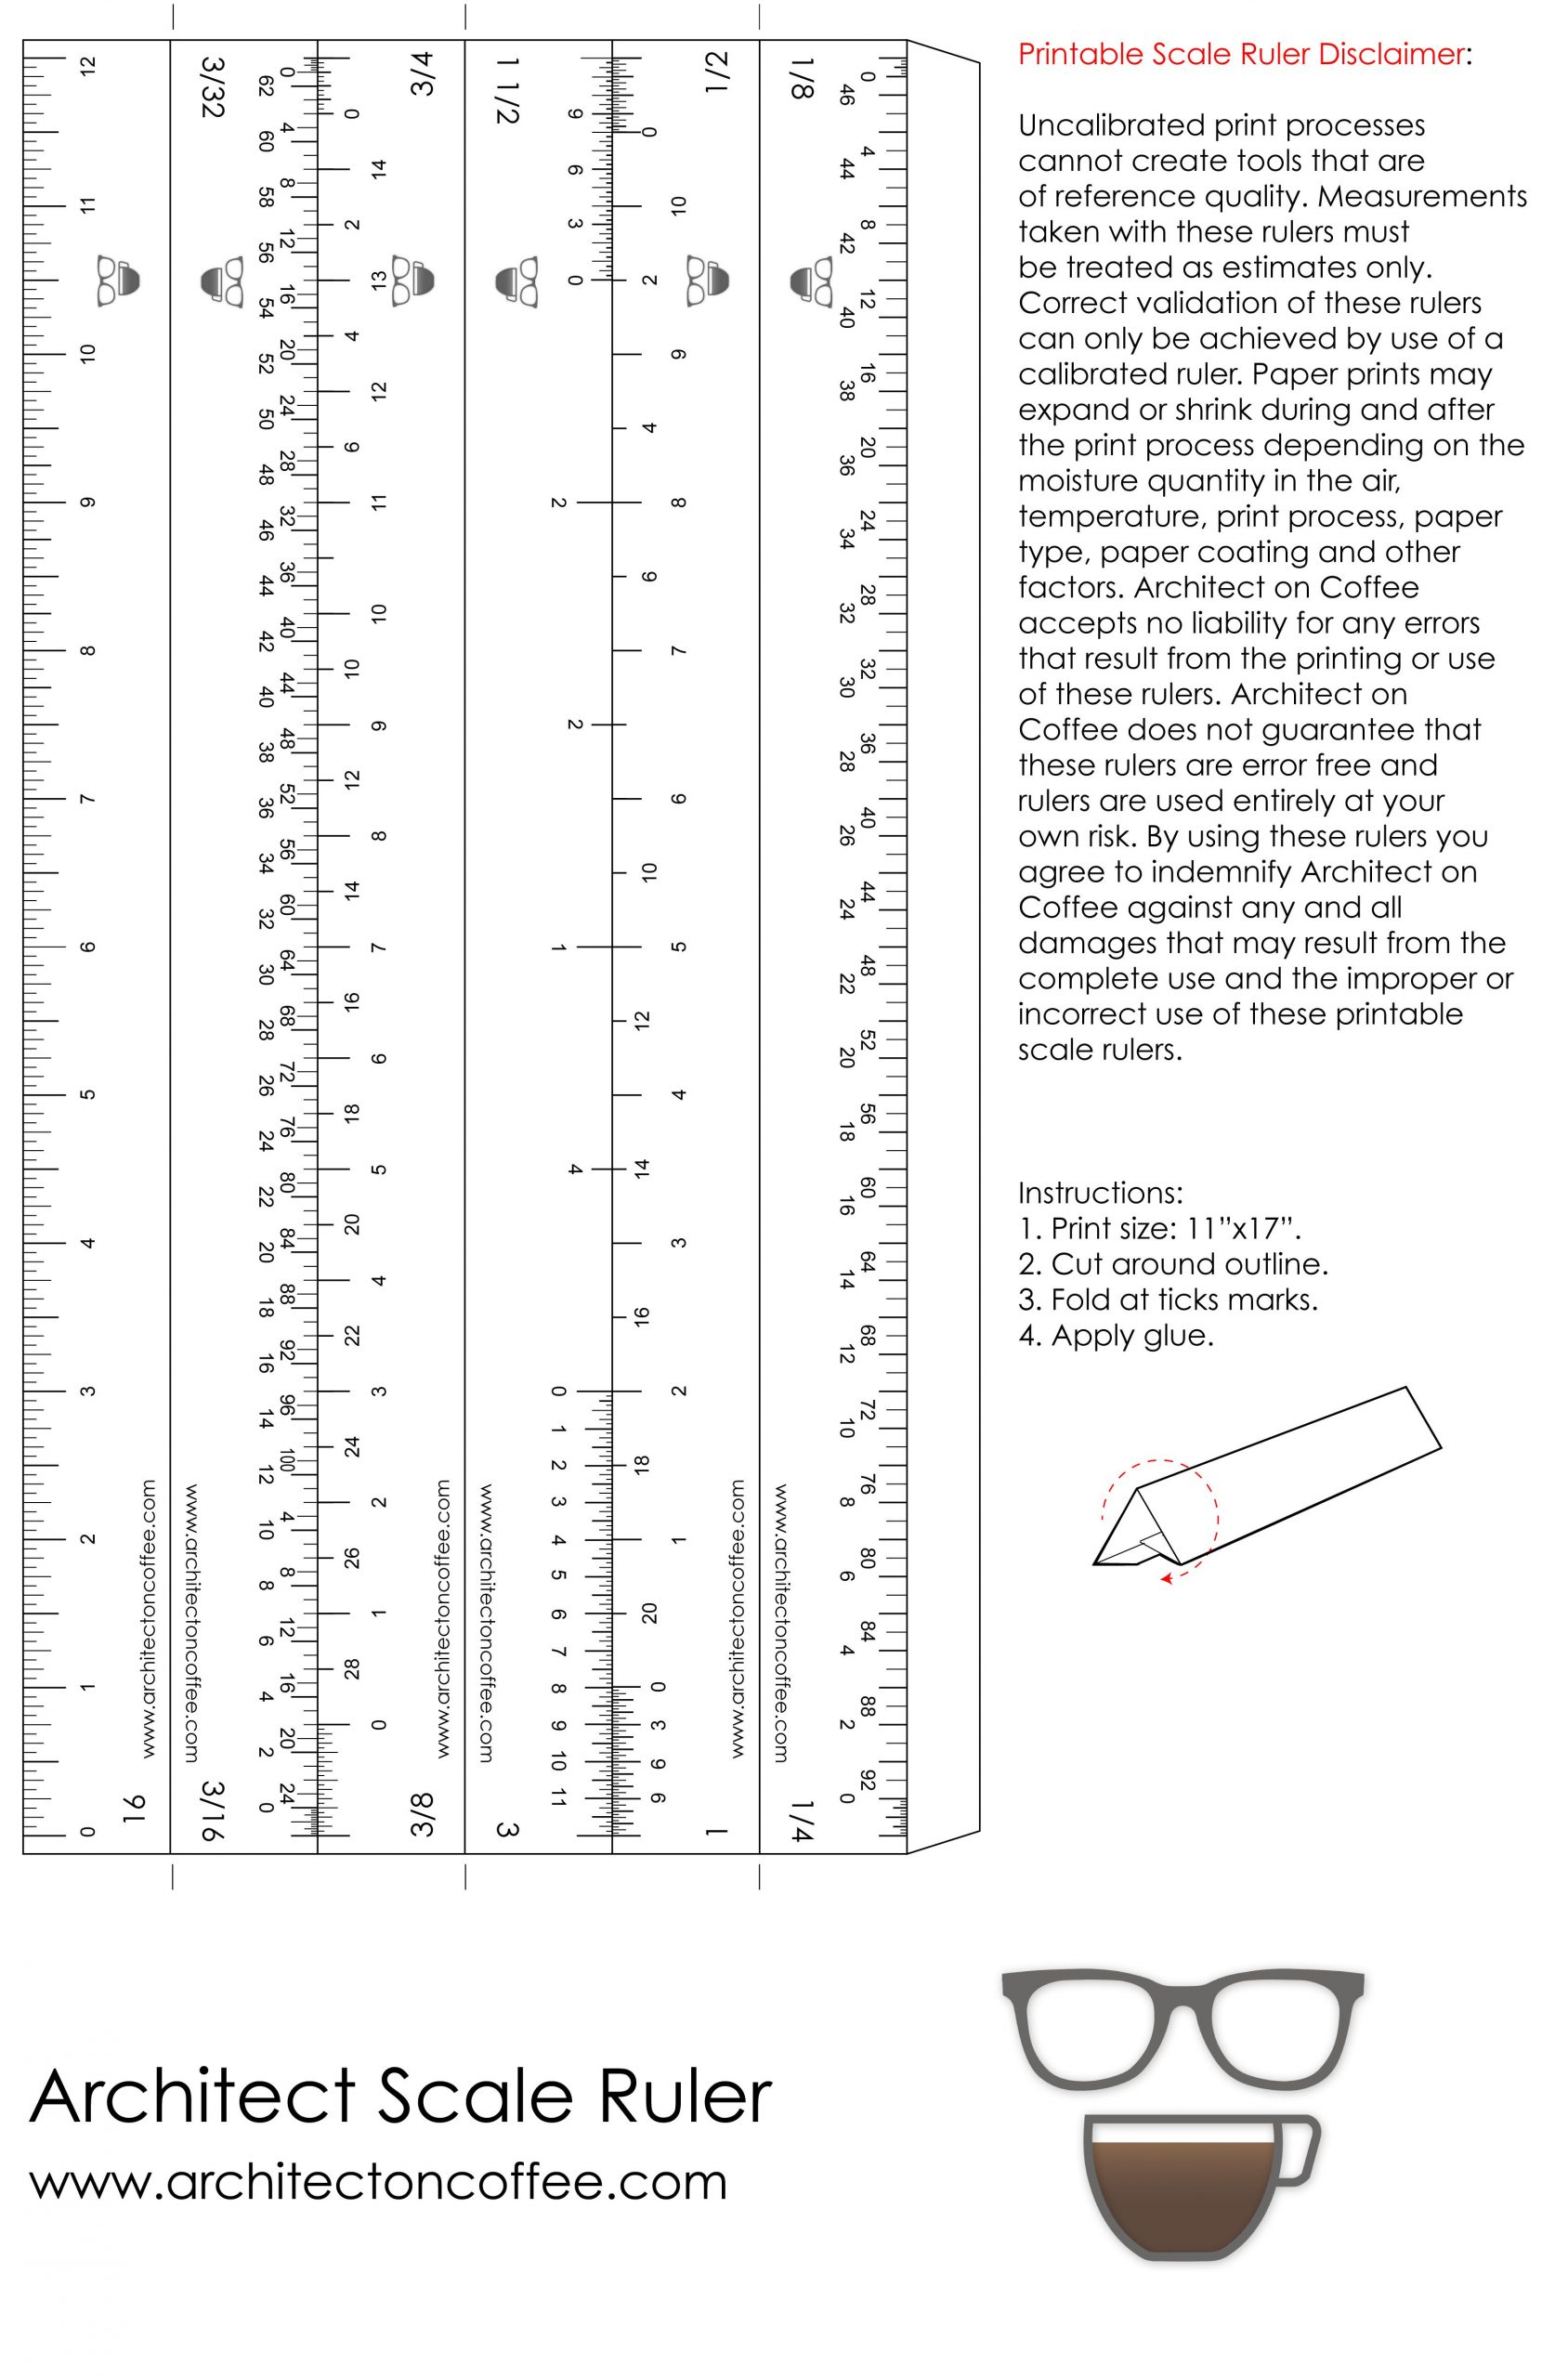 Subscribe | Architect Scale Ruler, Ruler, Blog